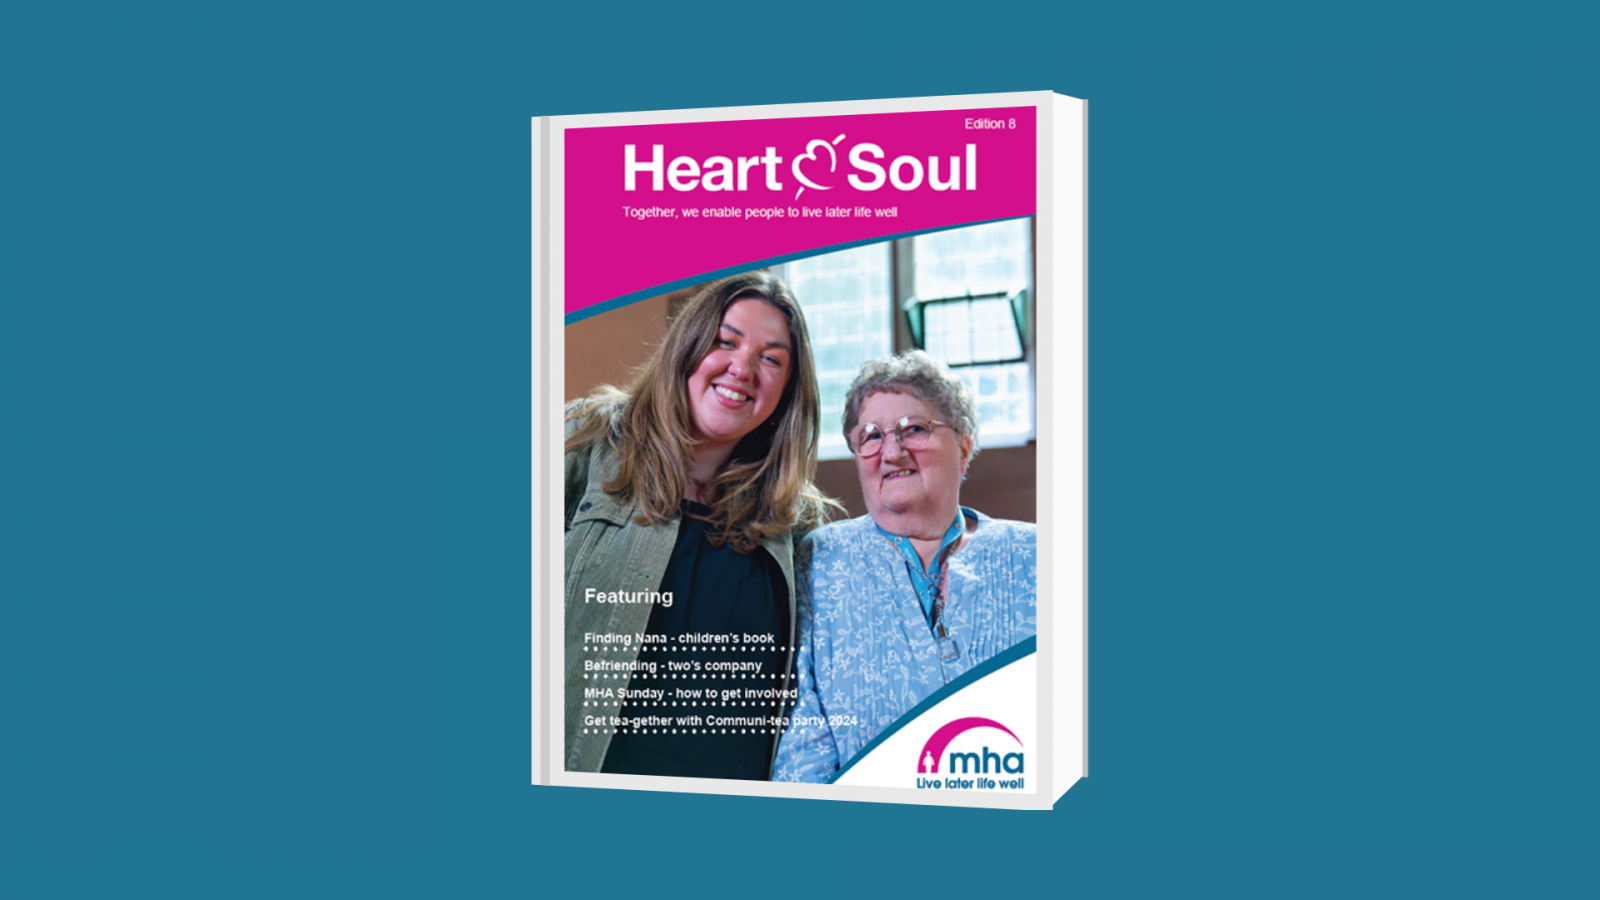 Heart & Soul edition 8 cover image featuring a young, female volunteer with an older woman, smiling.